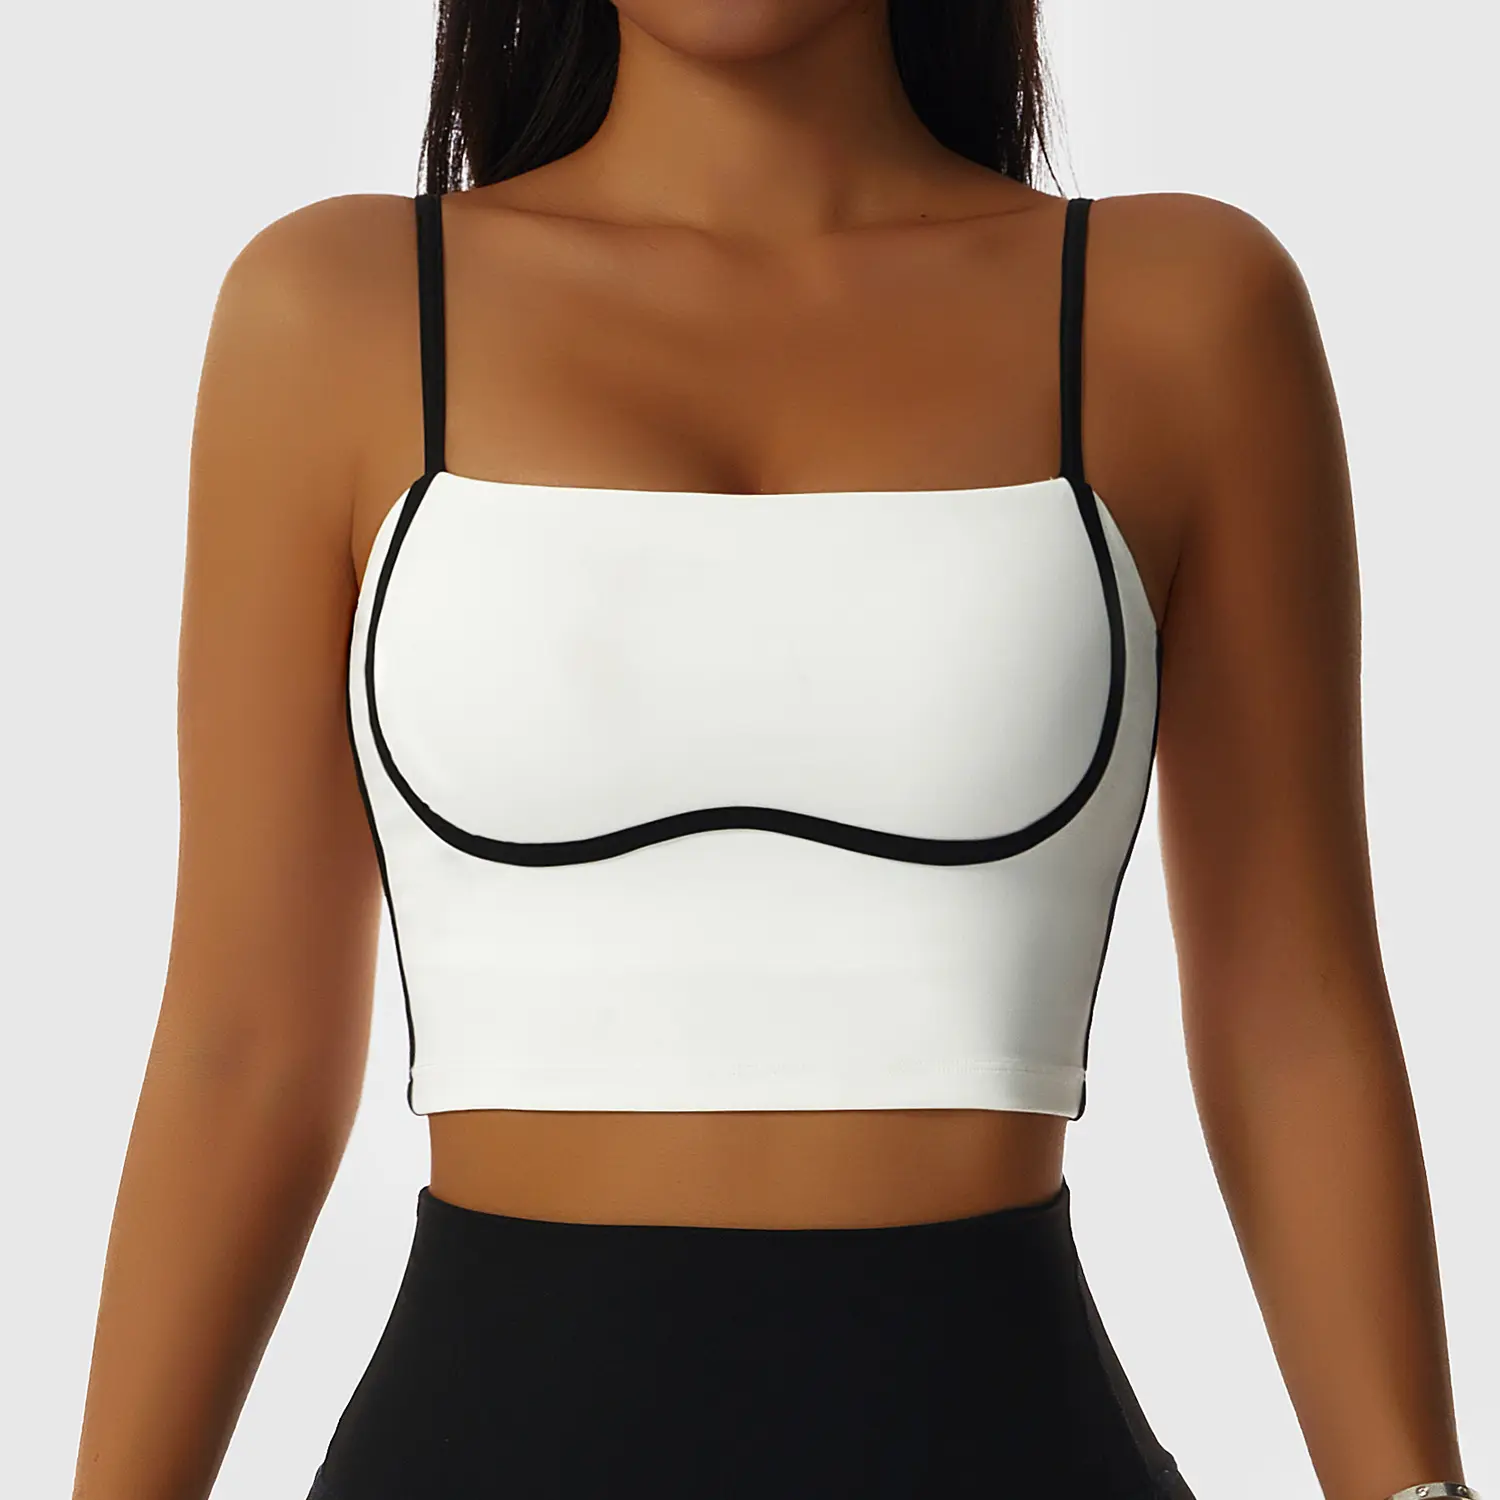 TOPKO Shockproof Quick-drying Contrast color yoga clothes women's striped sports bra fitness bra crop top workout clothing